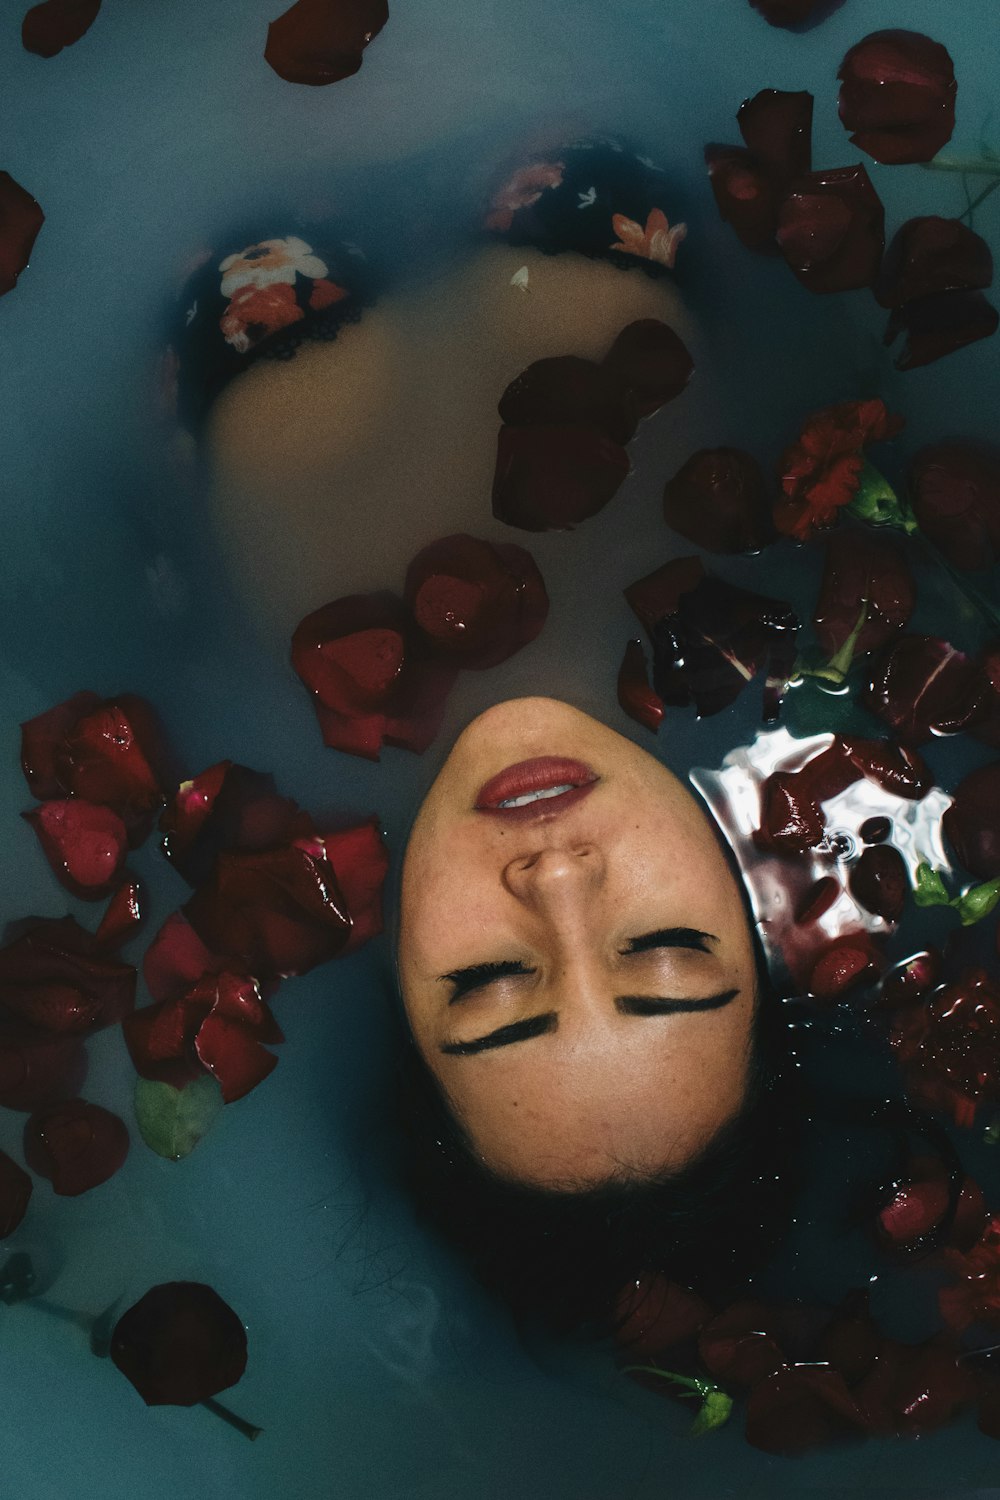 woman soaked in water filled with red petals showing face above water